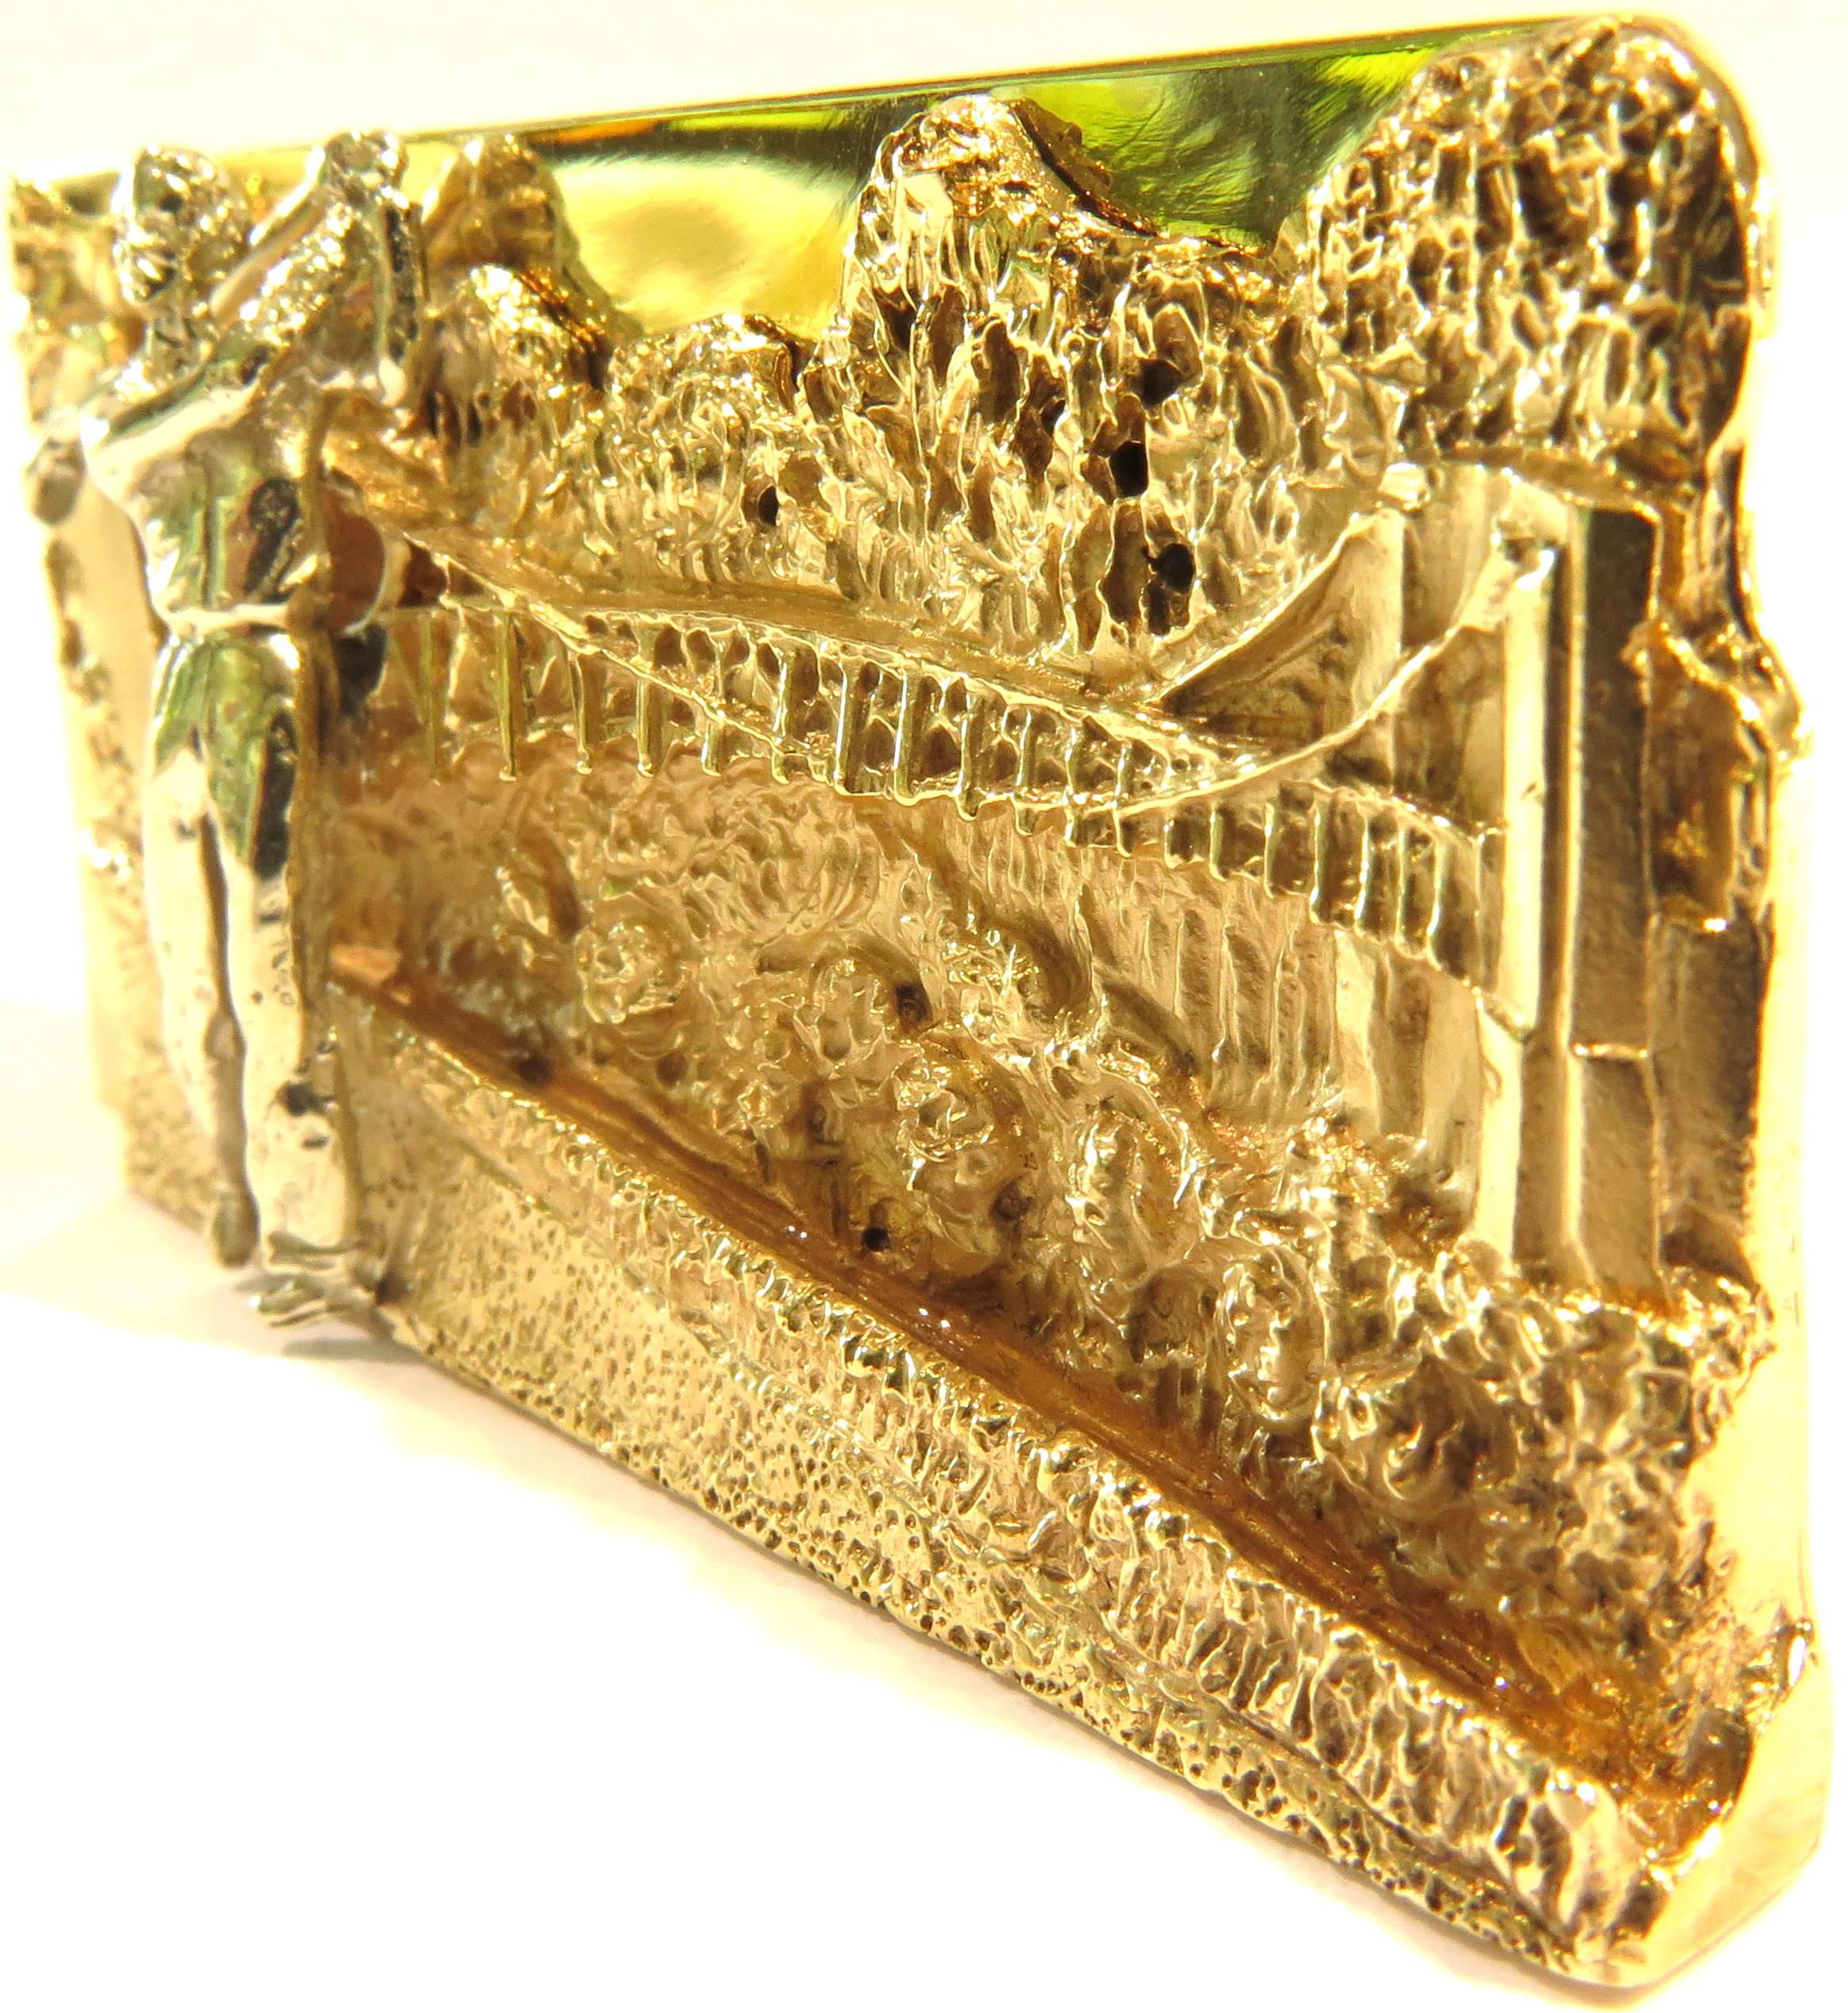 This exquisite Ruser money clip has more crisp detail than most sculptures! It really is a piece of art. The scene is of the iconic bridge at the Bel Air Country Club. This money clip is set in 14k yellow gold background with a 14k white gold